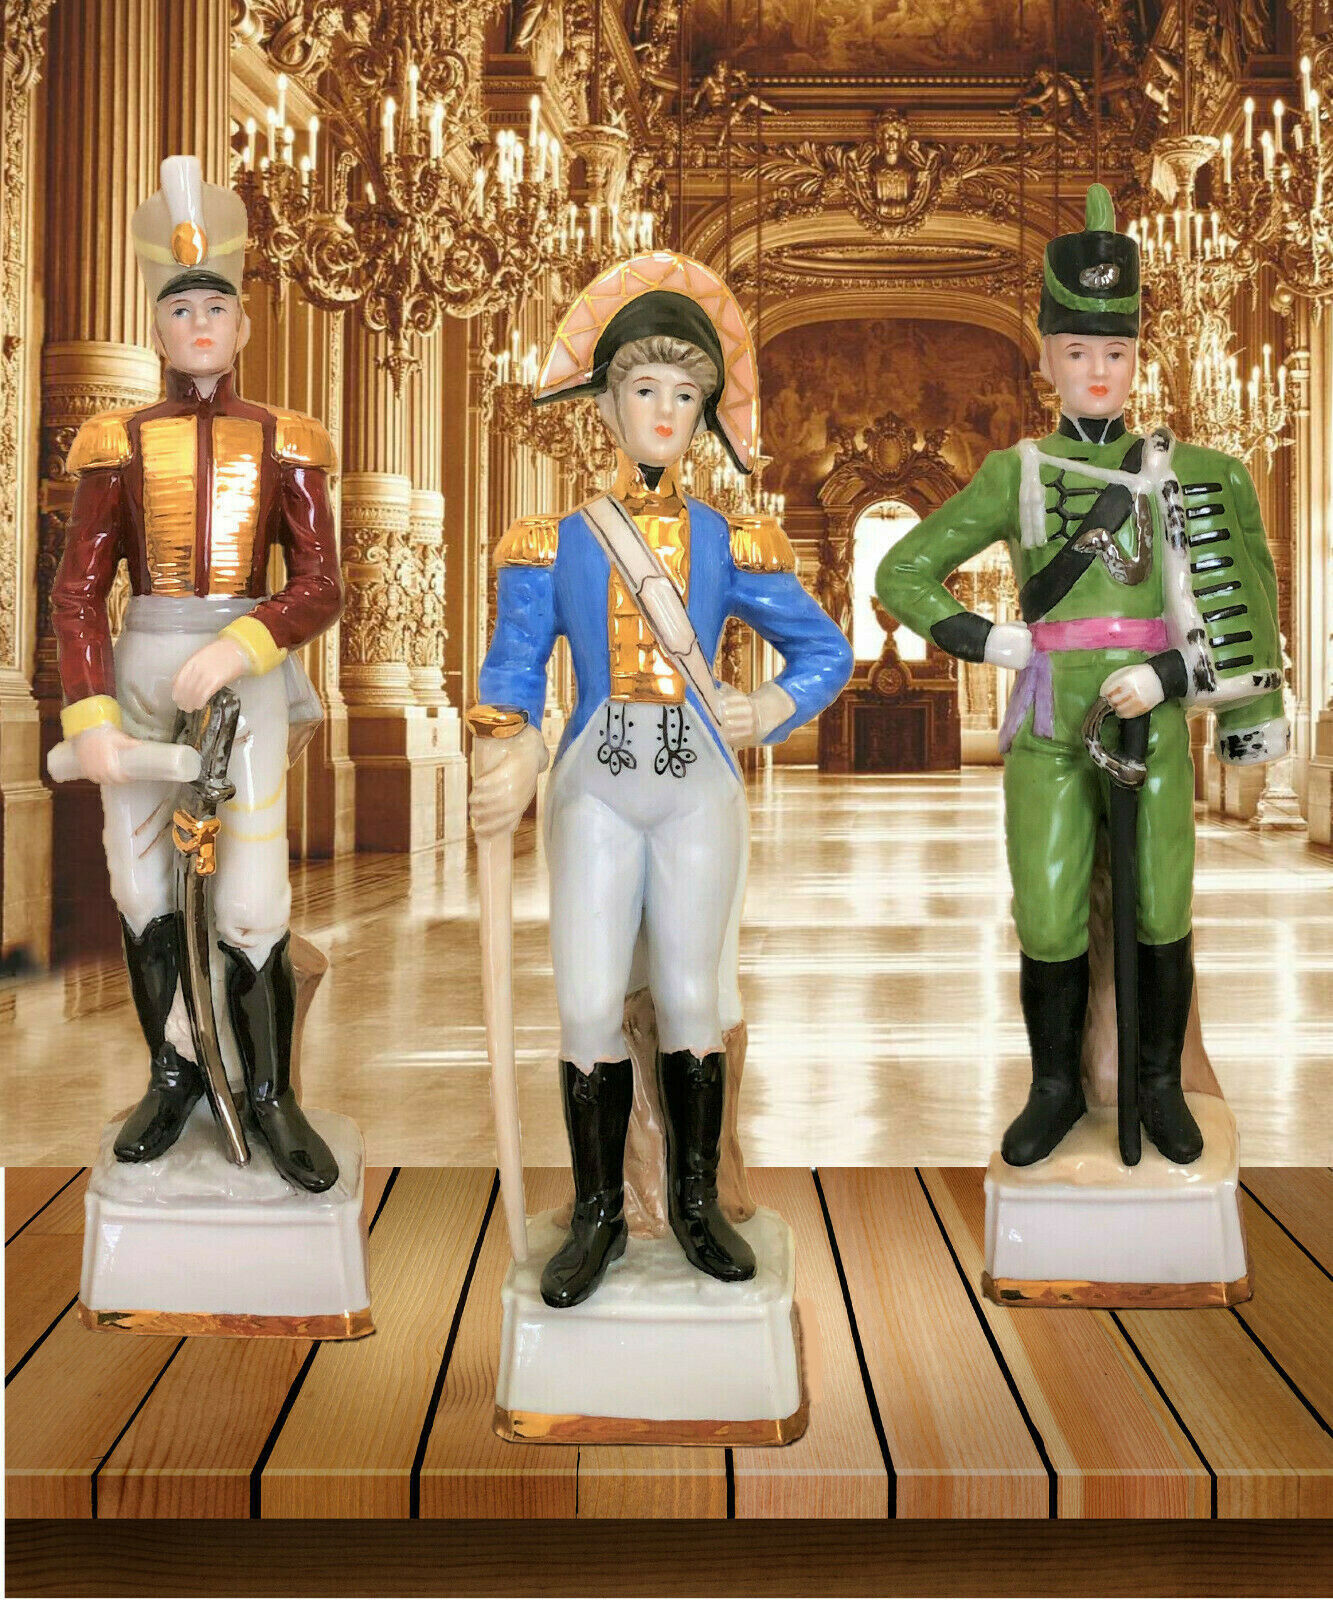 Three Colorful Napoleonic Officer Soldier Porcelain Figurine